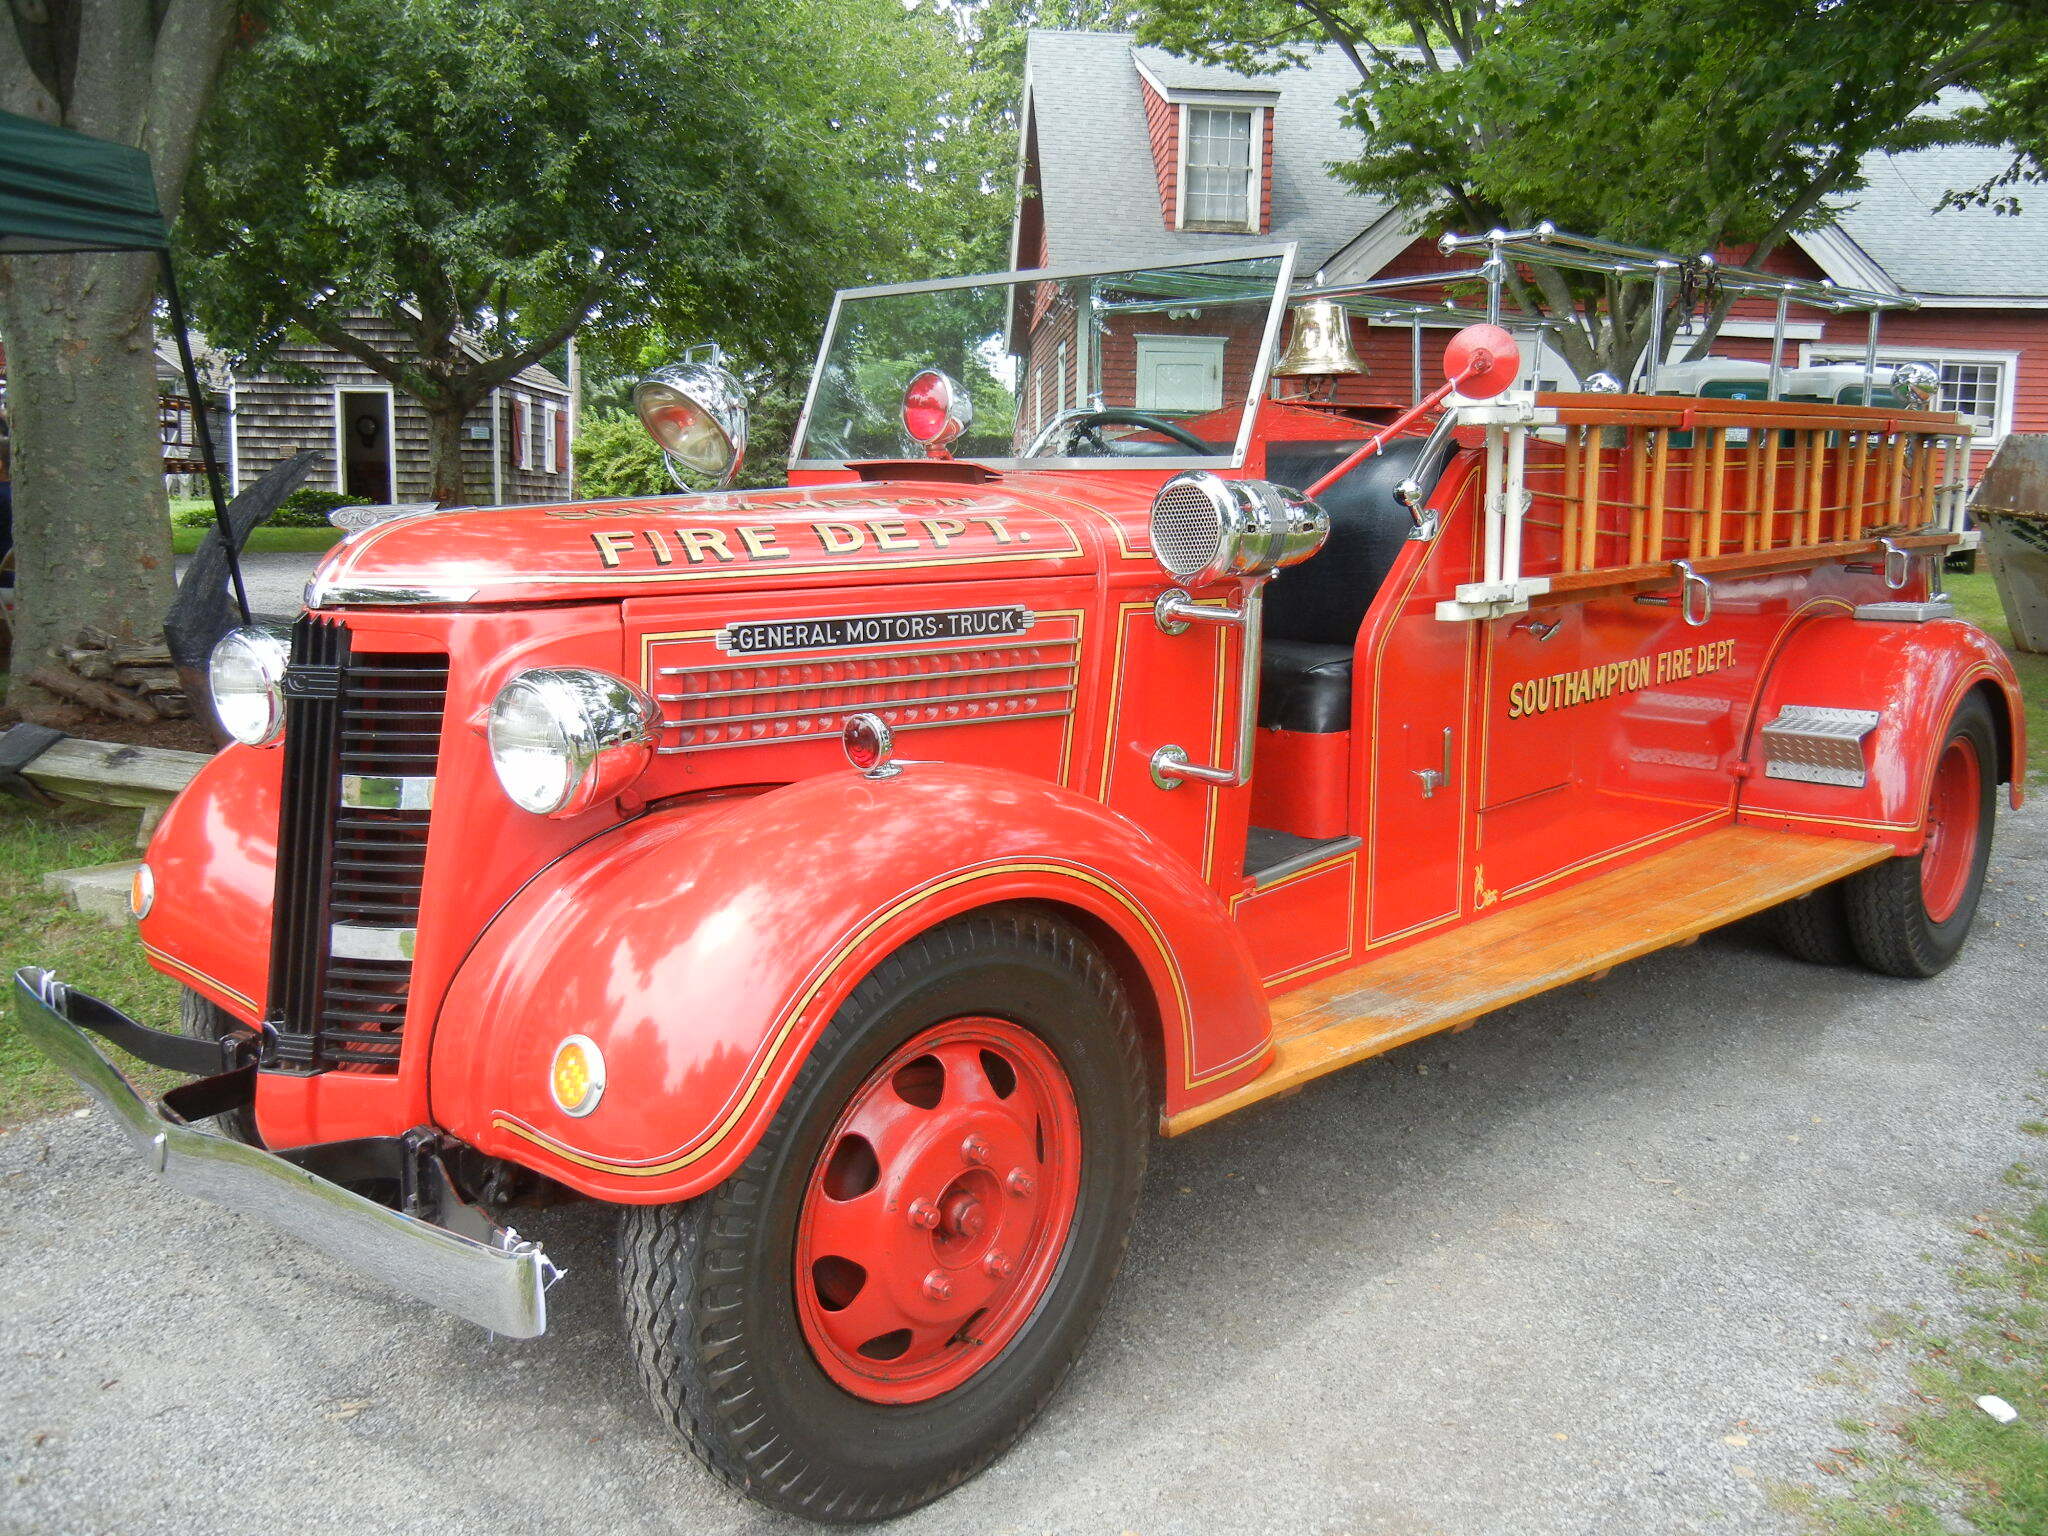 One of the Southampton Fire Department antique truck and ladder vehicles in 2018.